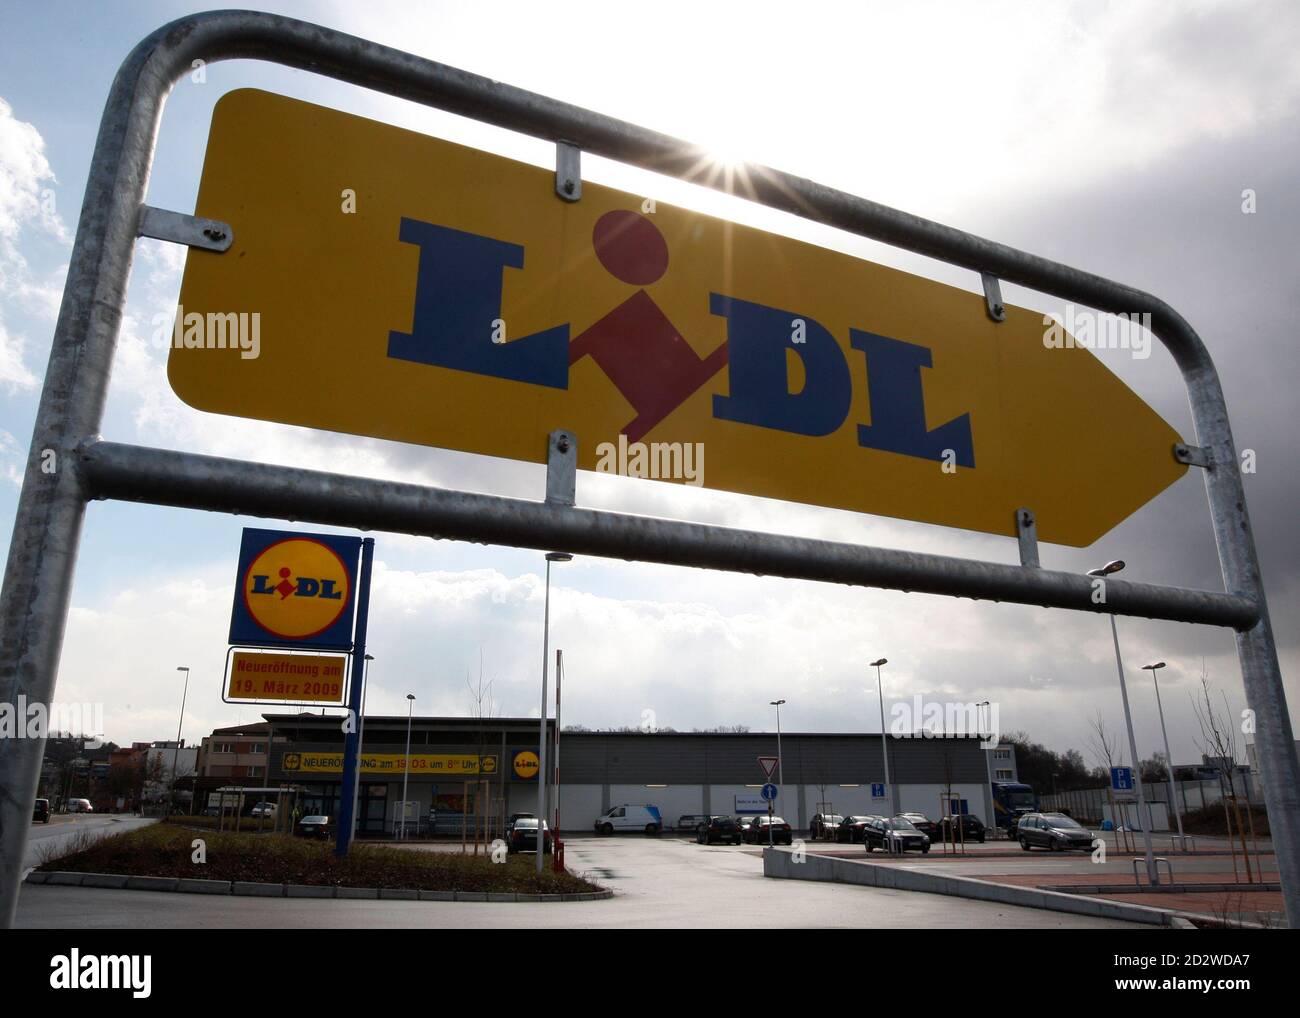 A general view shows the new Lidl supermarket in Kloten near Zurich March  11, 2009. The discount supermarket chain will open its thirteen first  supermarkets in Switzerland on next March 19. REUTERS/Christian